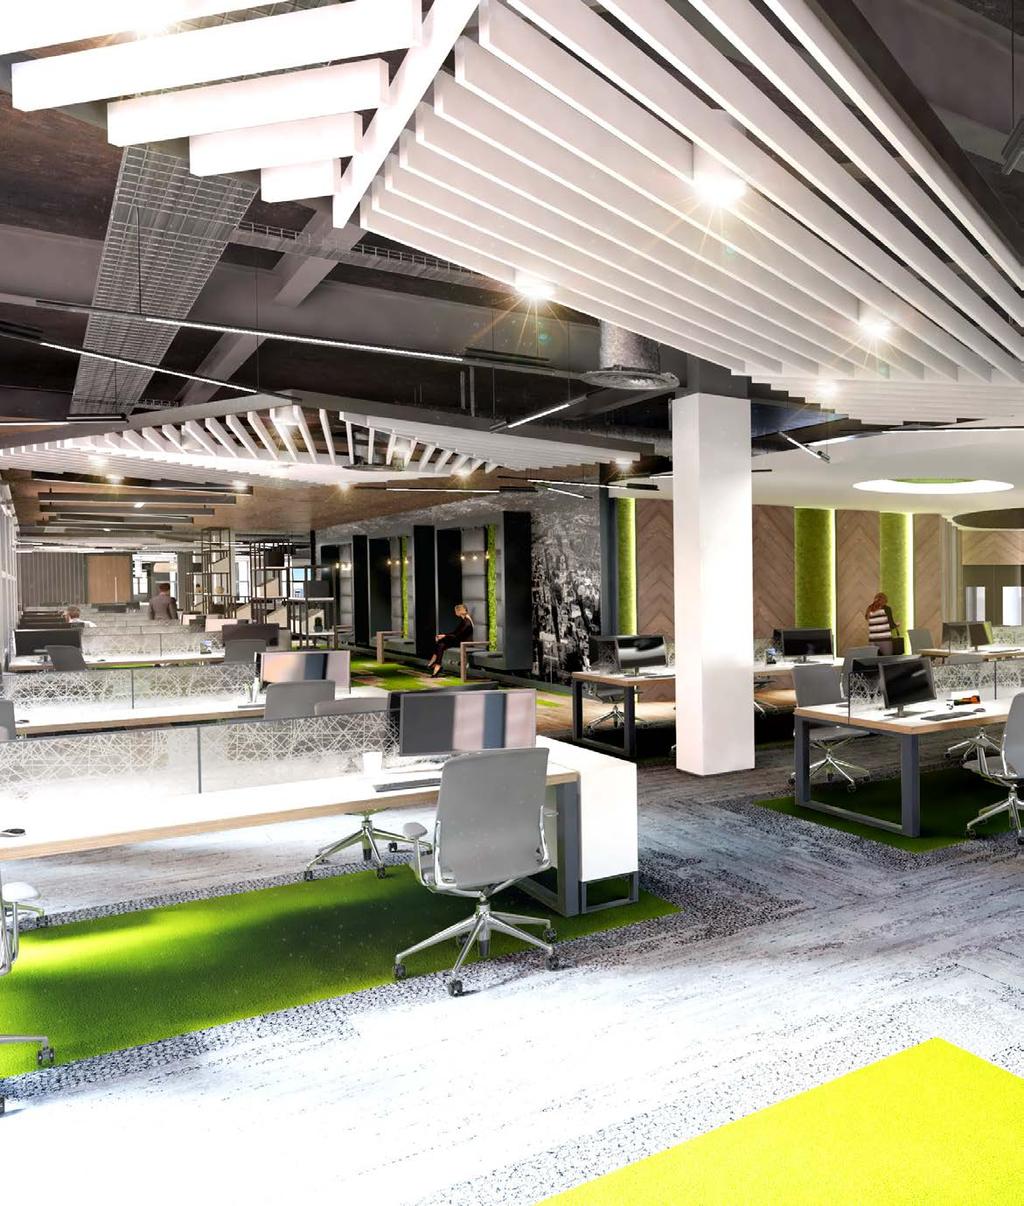 The Building Our fit-out team has also worked tirelessly to create an interior